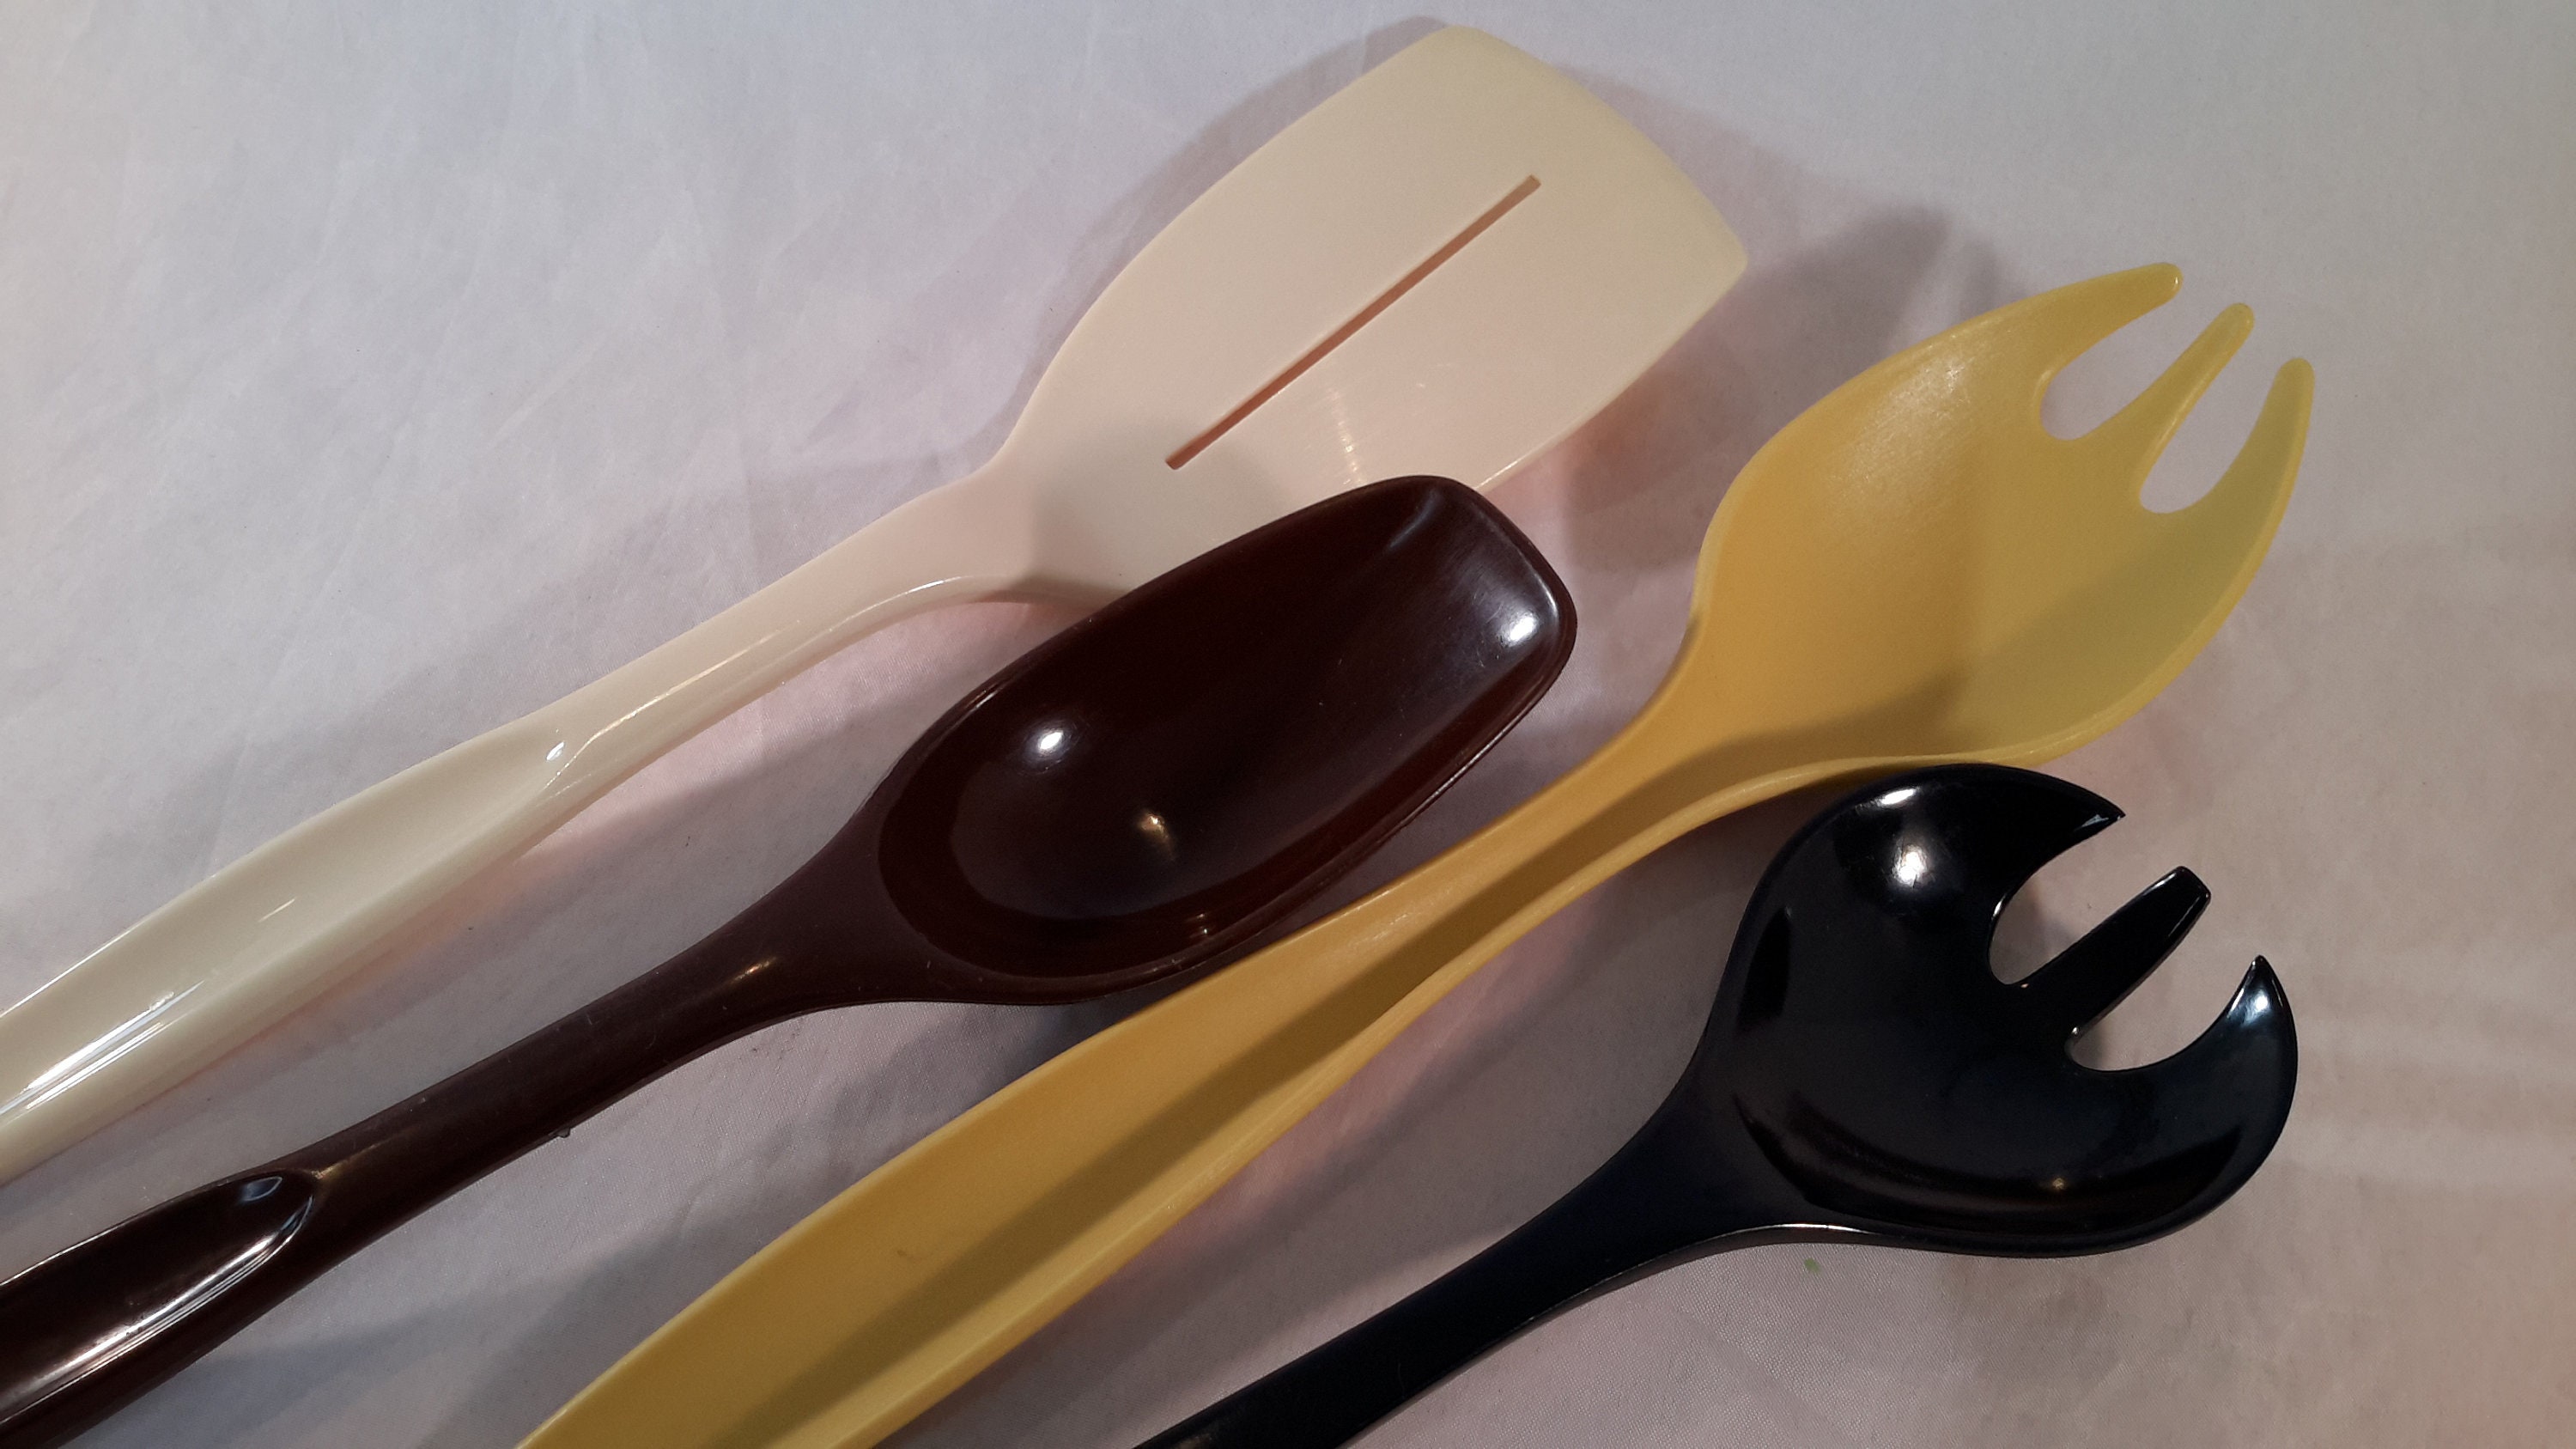 Assorted Plastic Nylon Kitchen Utensils Vintage Slotted Spoon  Spatula/flipper Ladles Your Choice of Cooking Utensils 